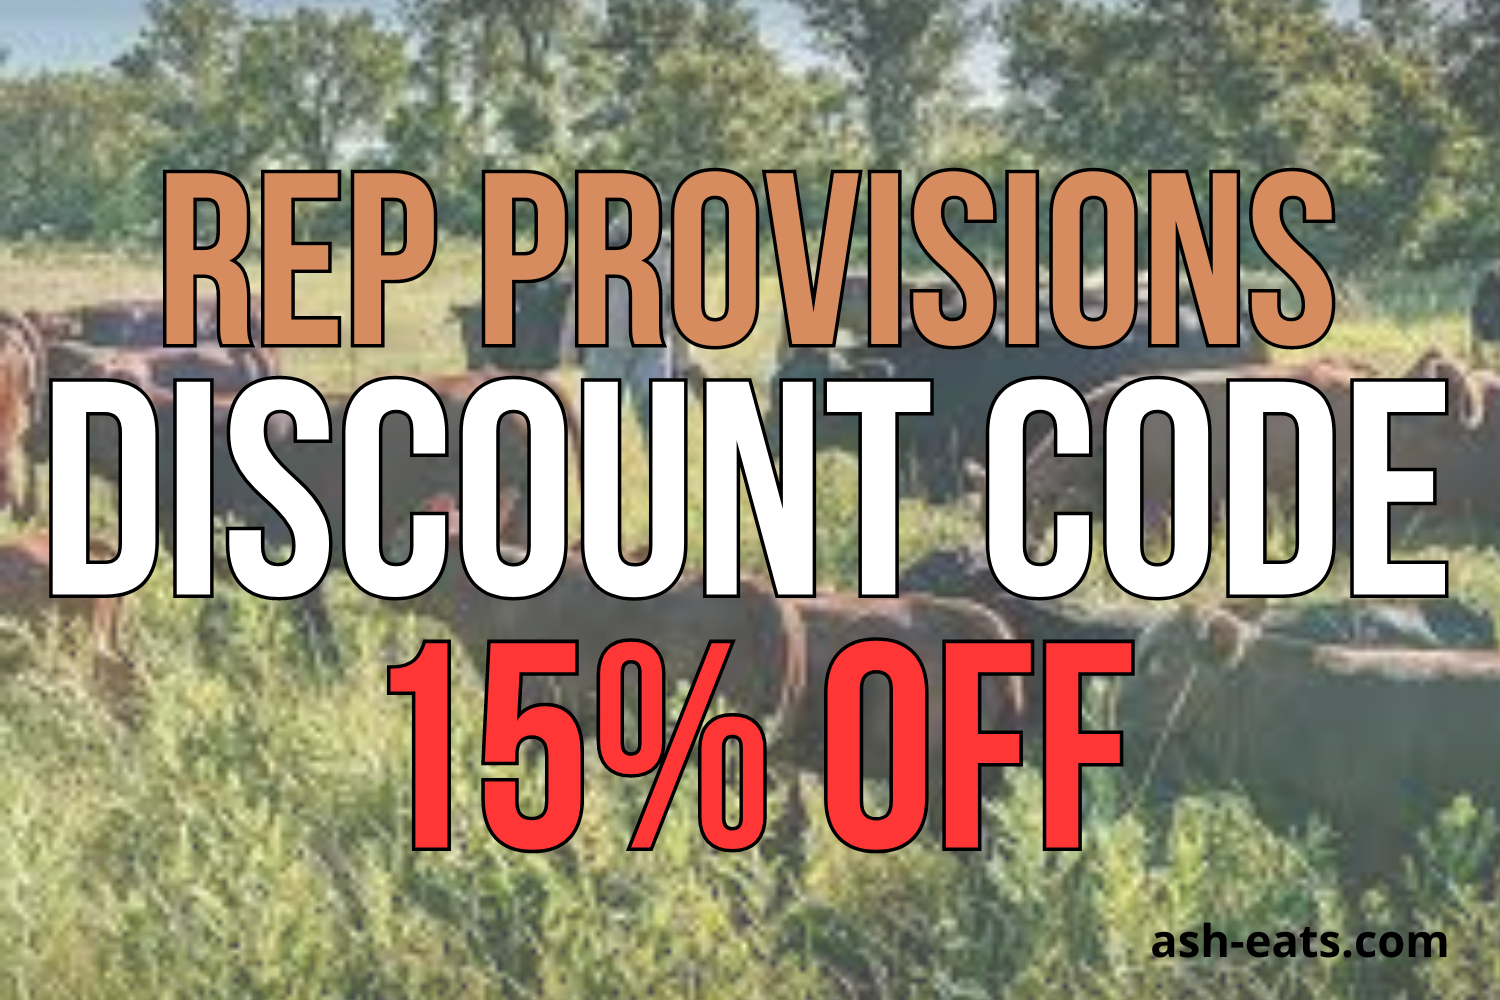 rep provisions discount code